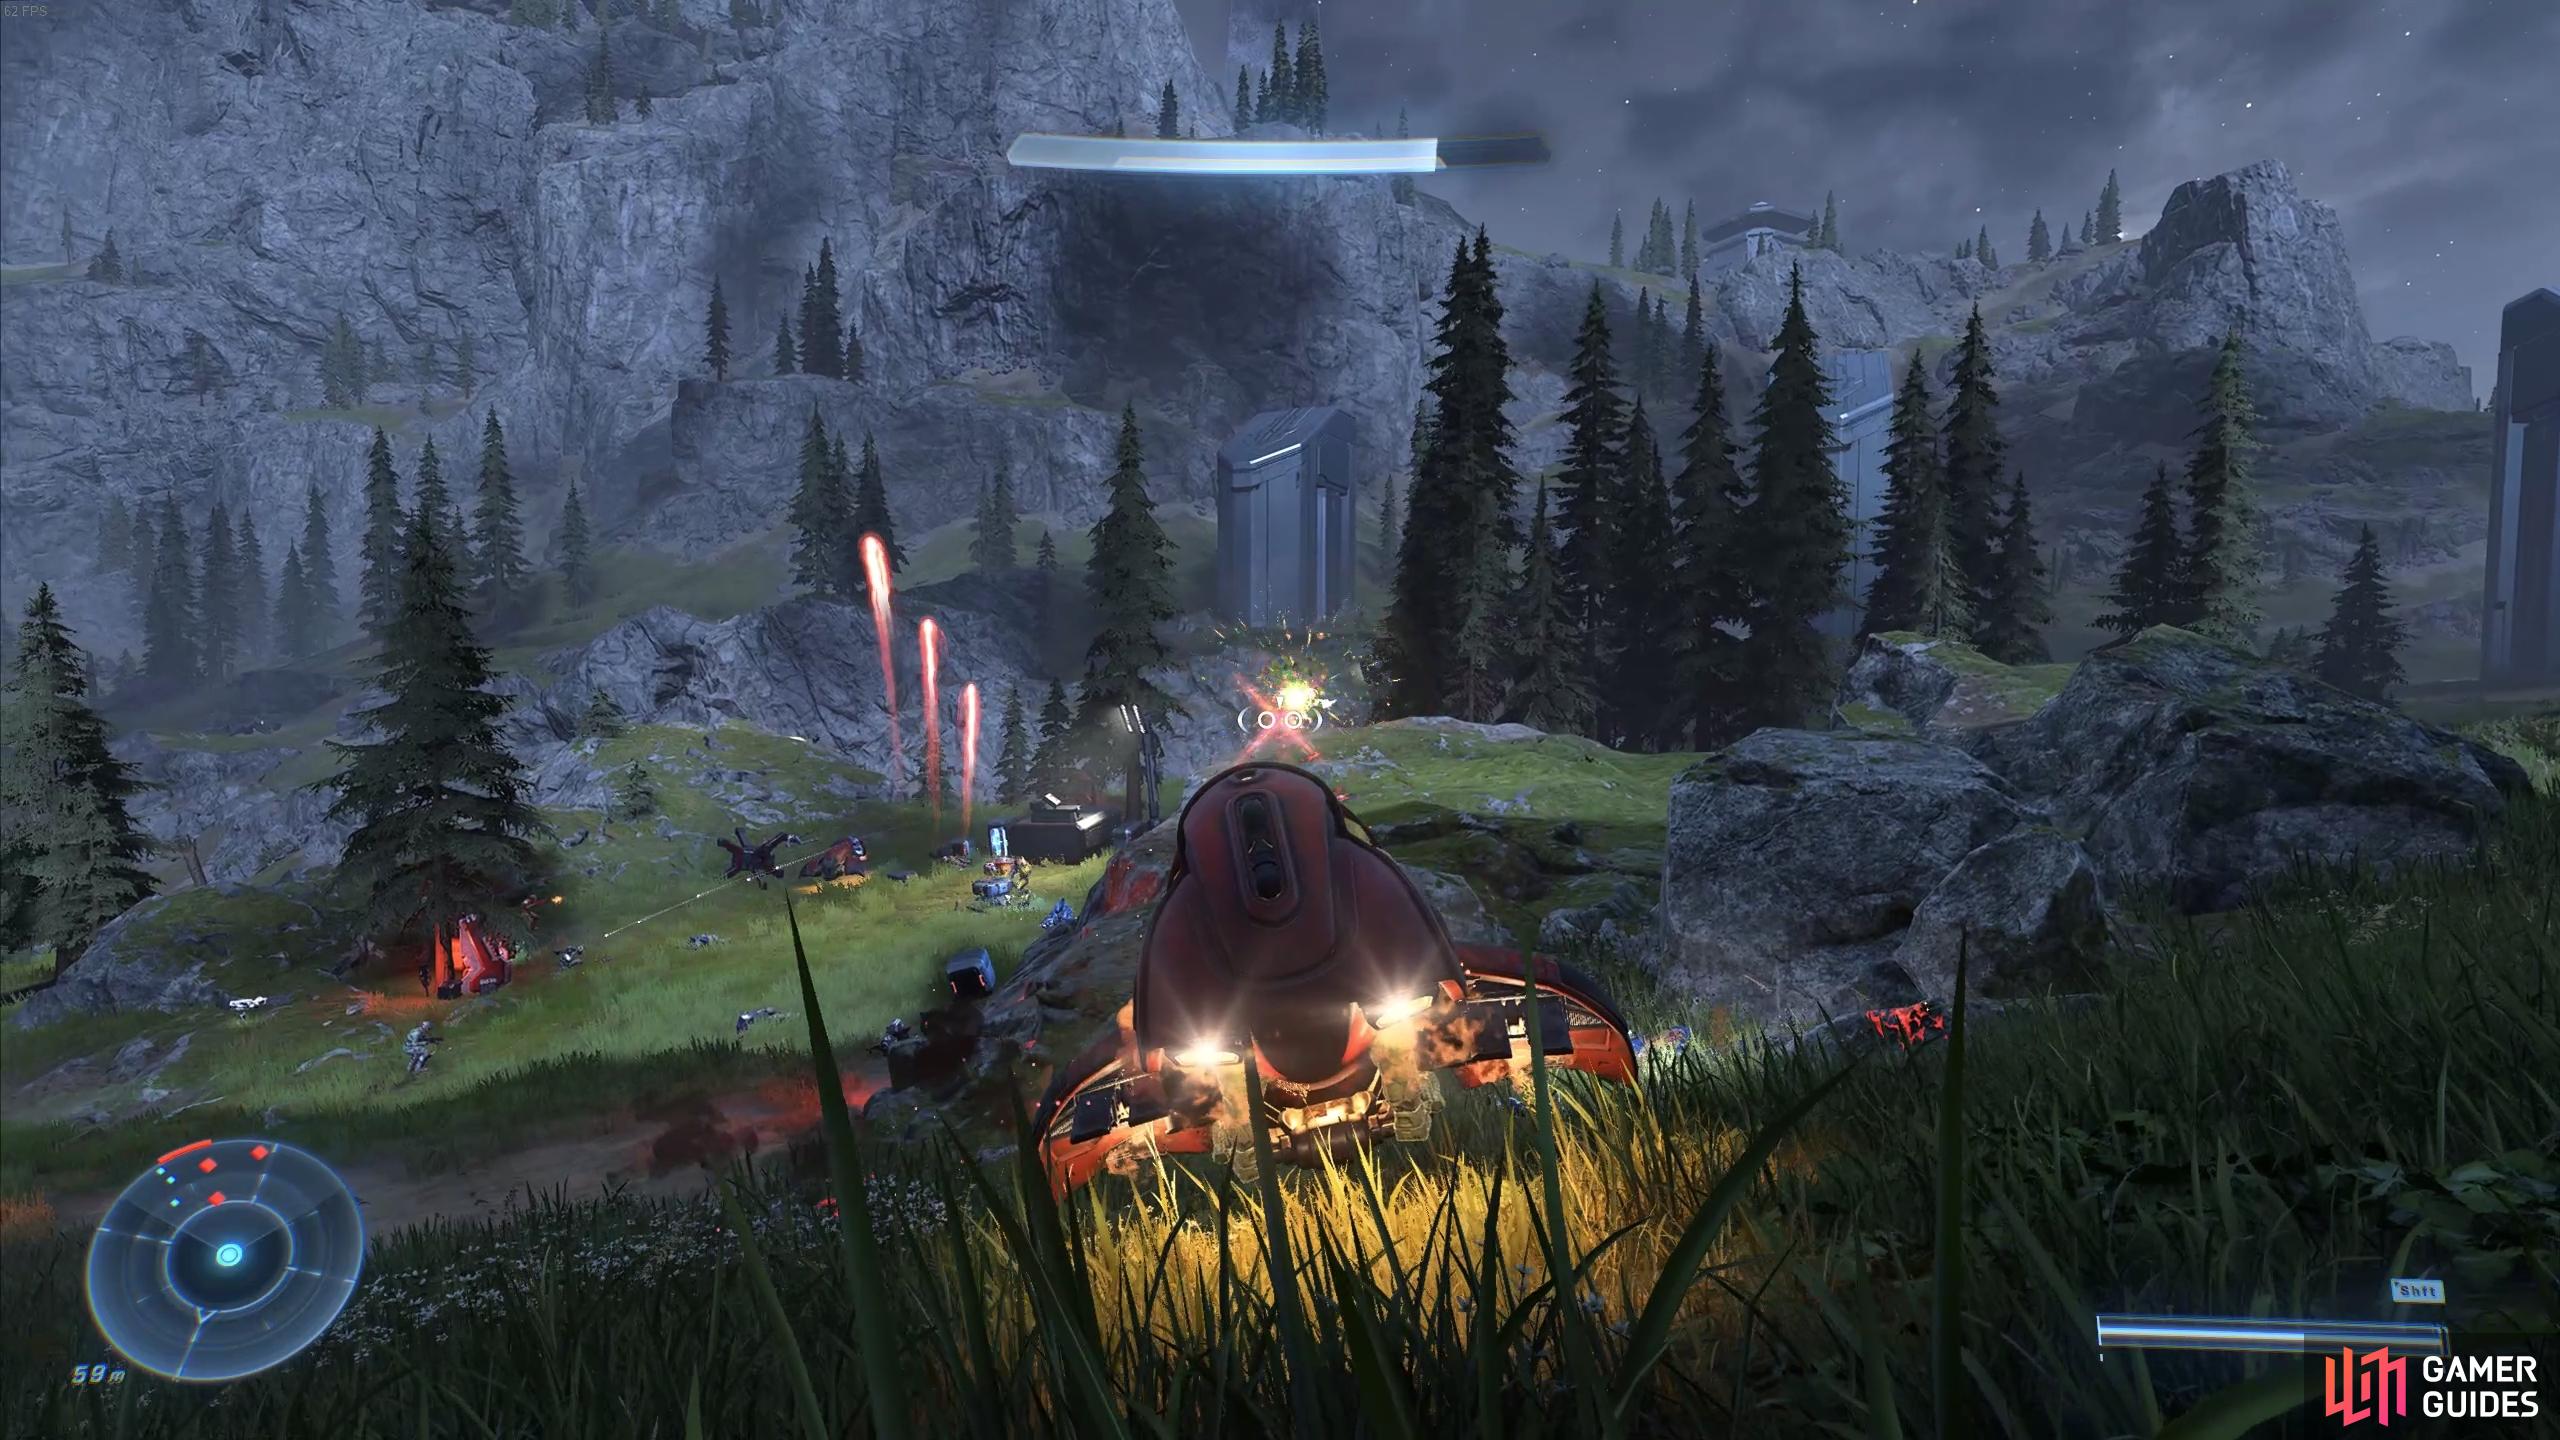 The Ghost can be used to quickly dispatch additional enemies in the area.